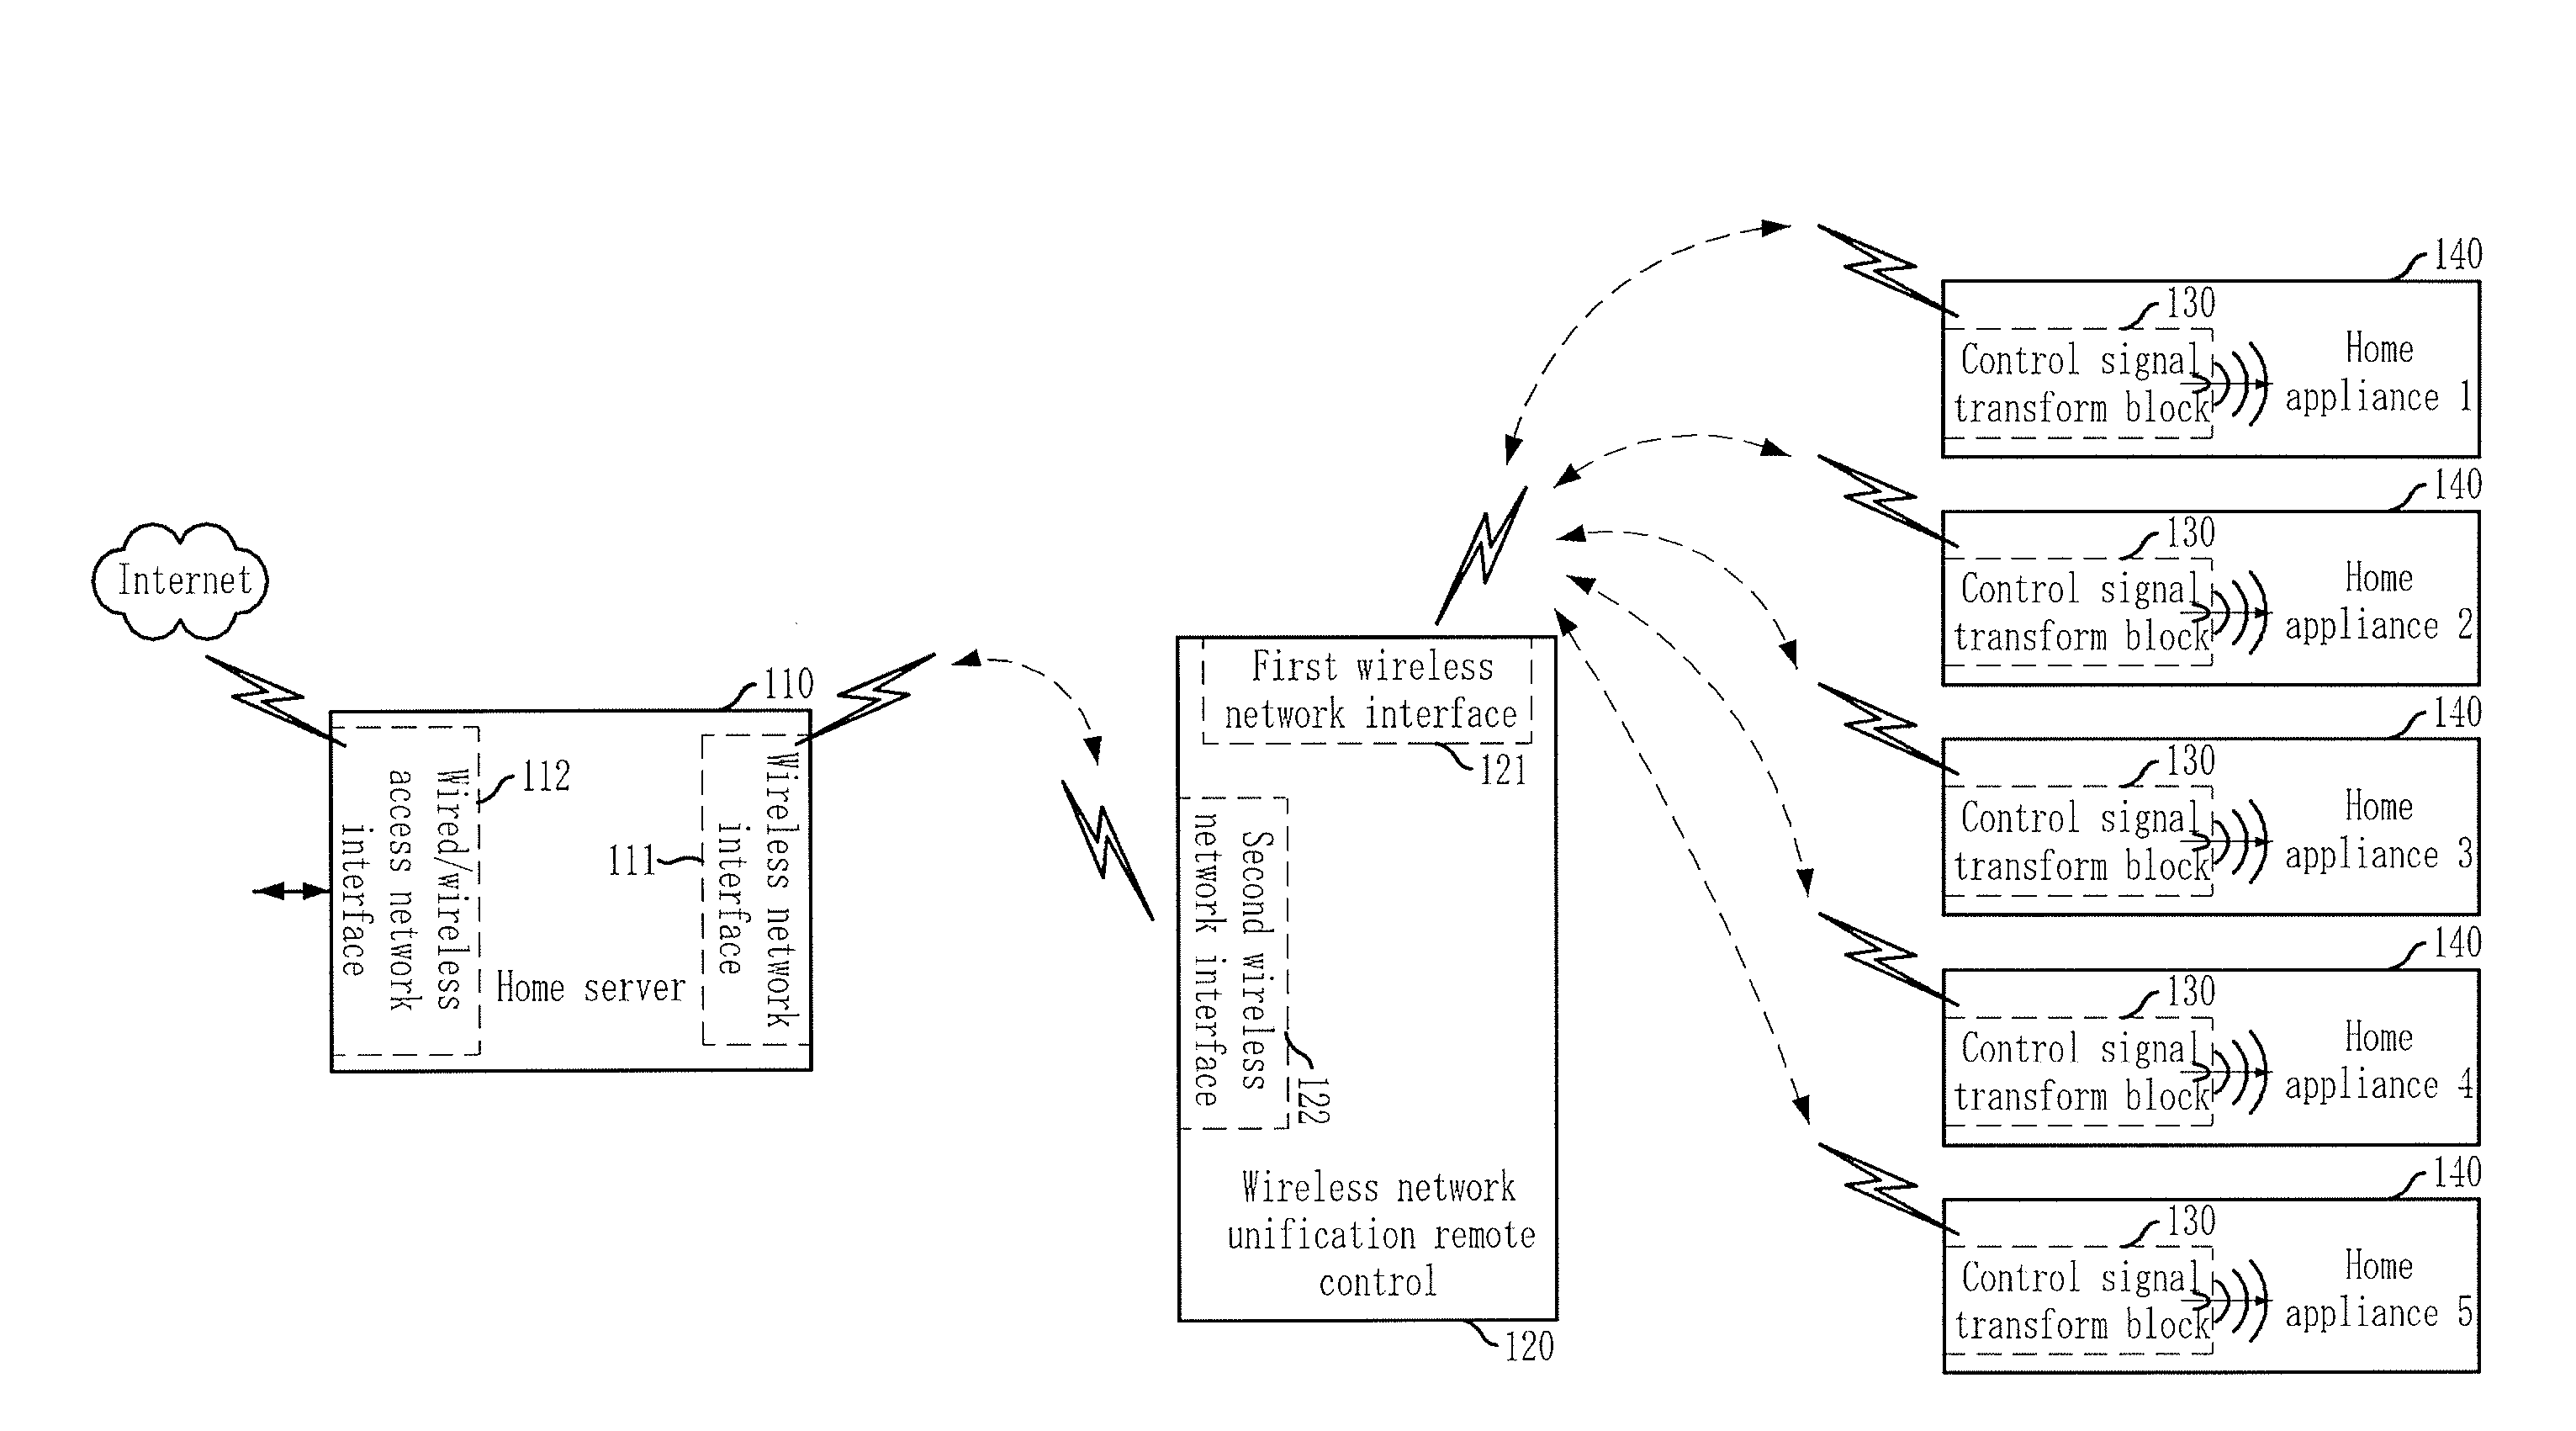 Apparatus and method for controlling home appliances using zigbee wireless communication